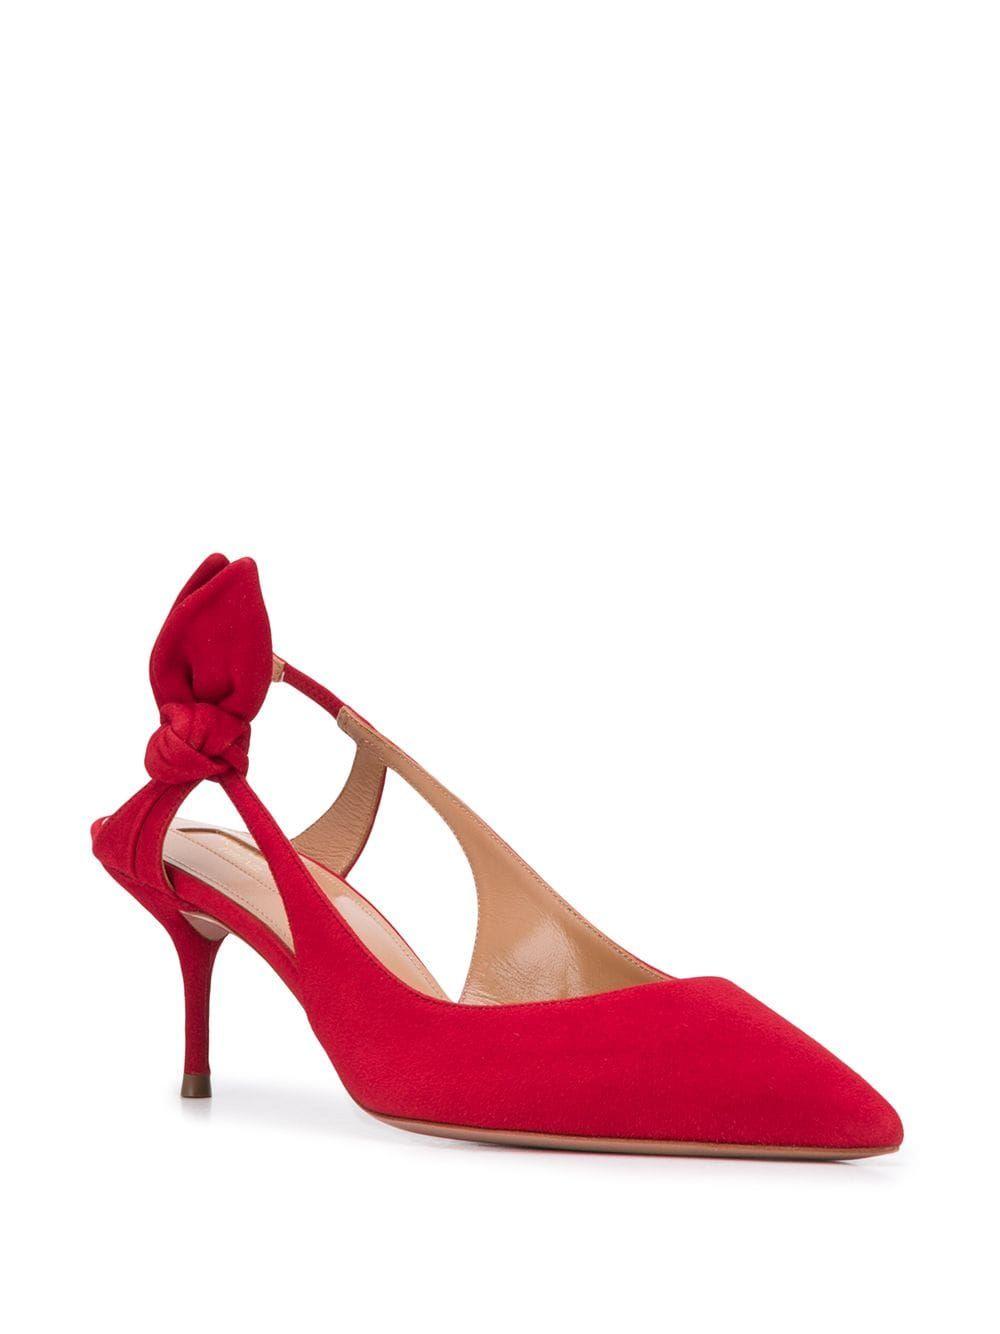 Aquazzura Leather Slingback Knot Pumps in Red | Lyst